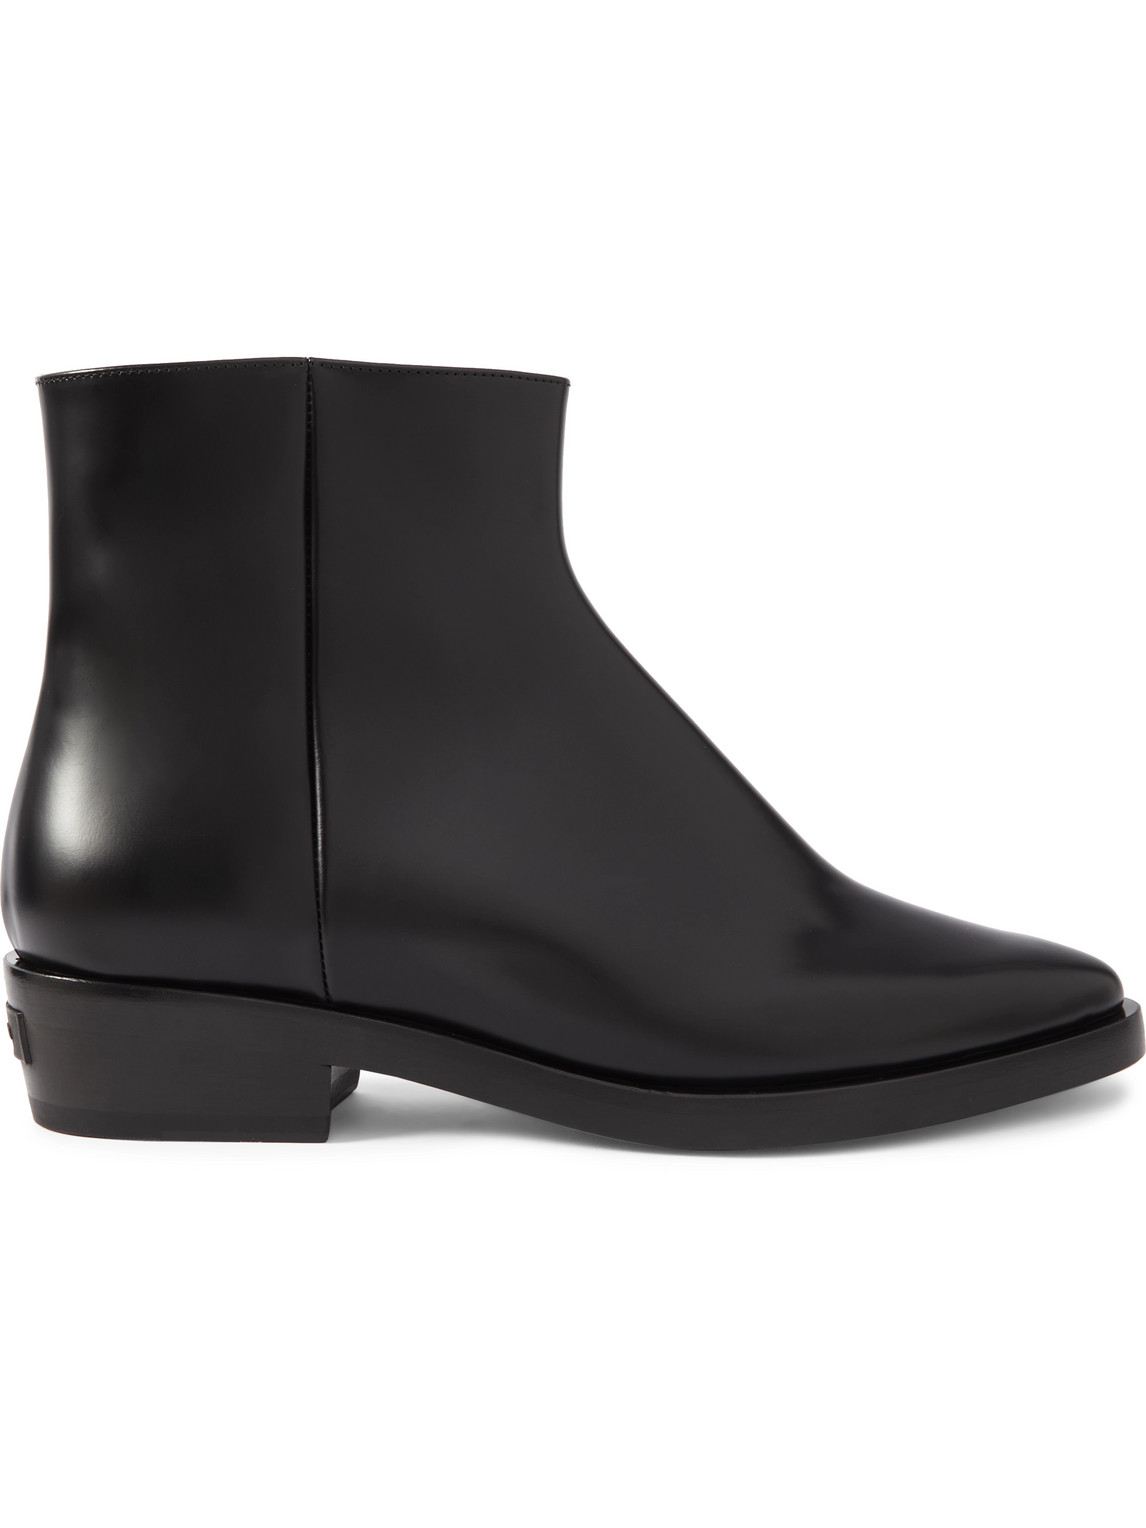 FEAR OF GOD WESTERN LOW LEATHER ANKLE BOOTS